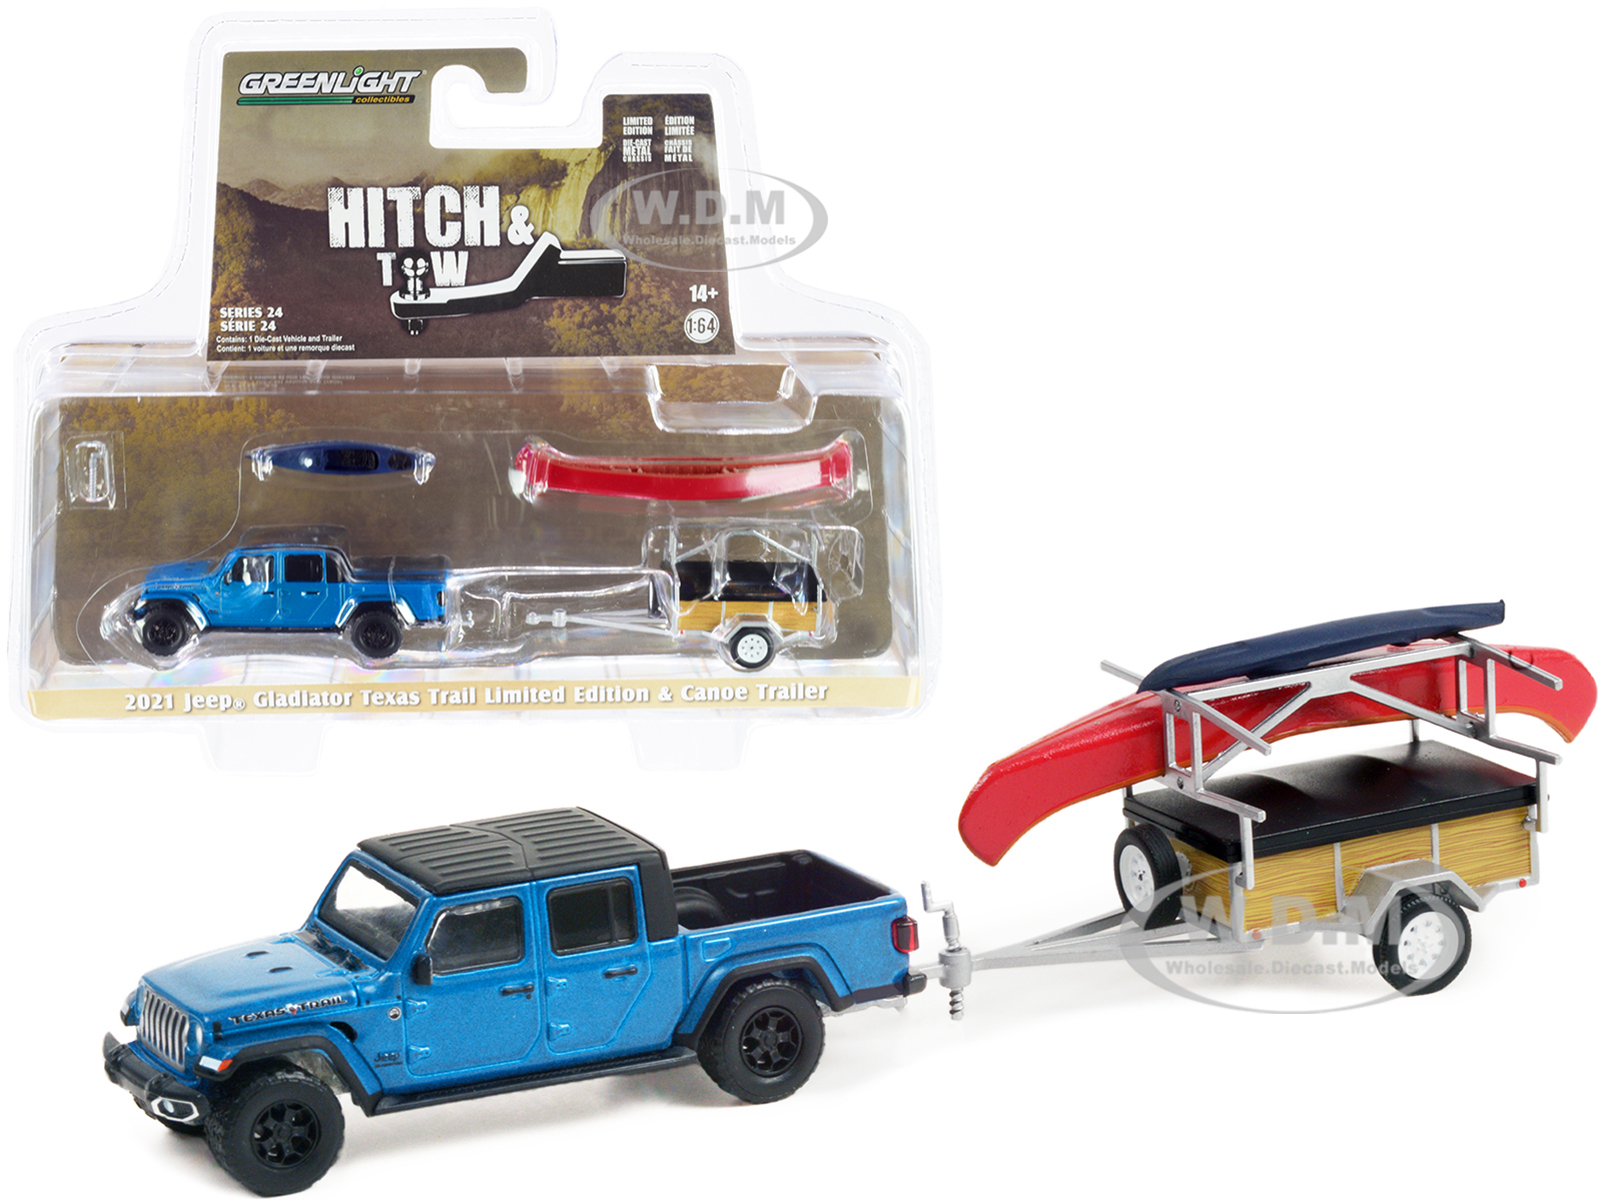 2021 Jeep Gladiator Texas Trail Limited Edition Pickup Truck Hydro Blue Pearl with Black Top with Canoe Trailer and Canoe Rack with Canoe and Kayak "